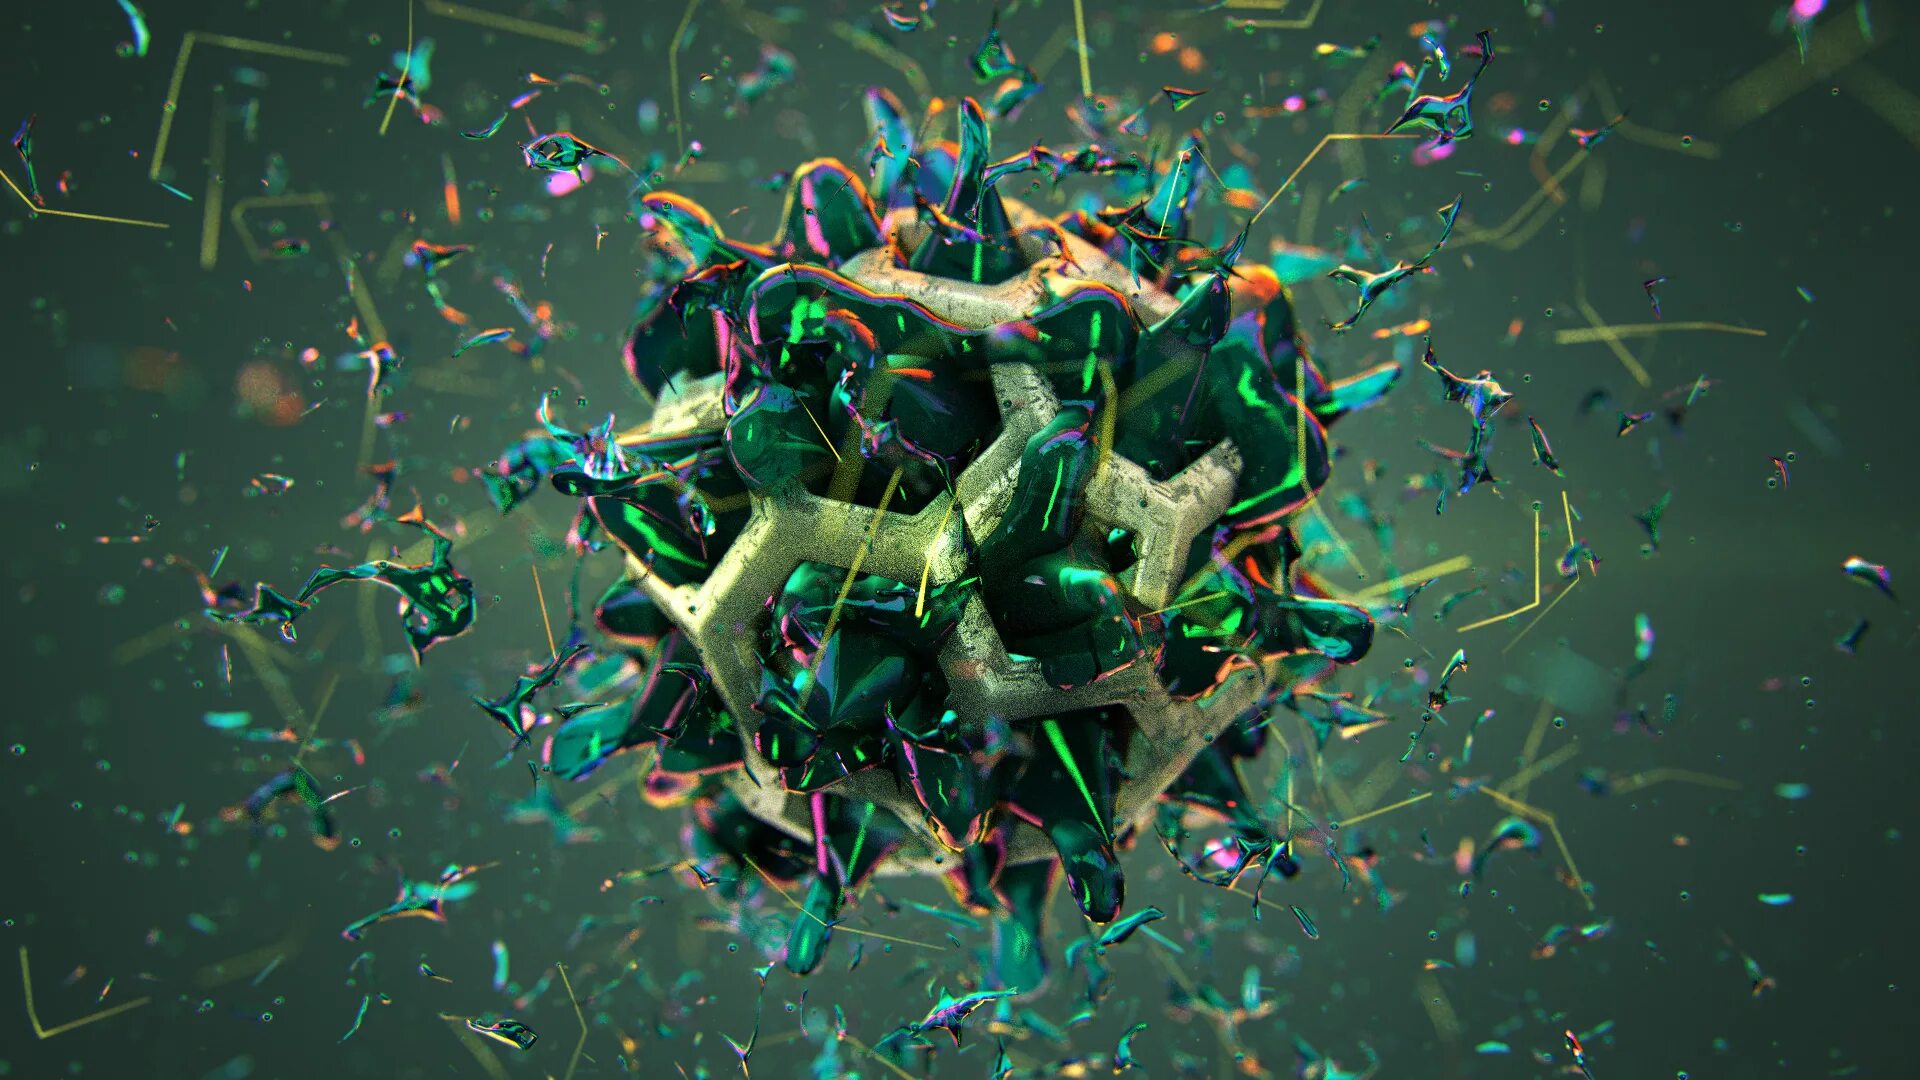 X Particles c4d. Abstract Particles. Particles Visual. Splash SUBUV Particle. Lots of effort